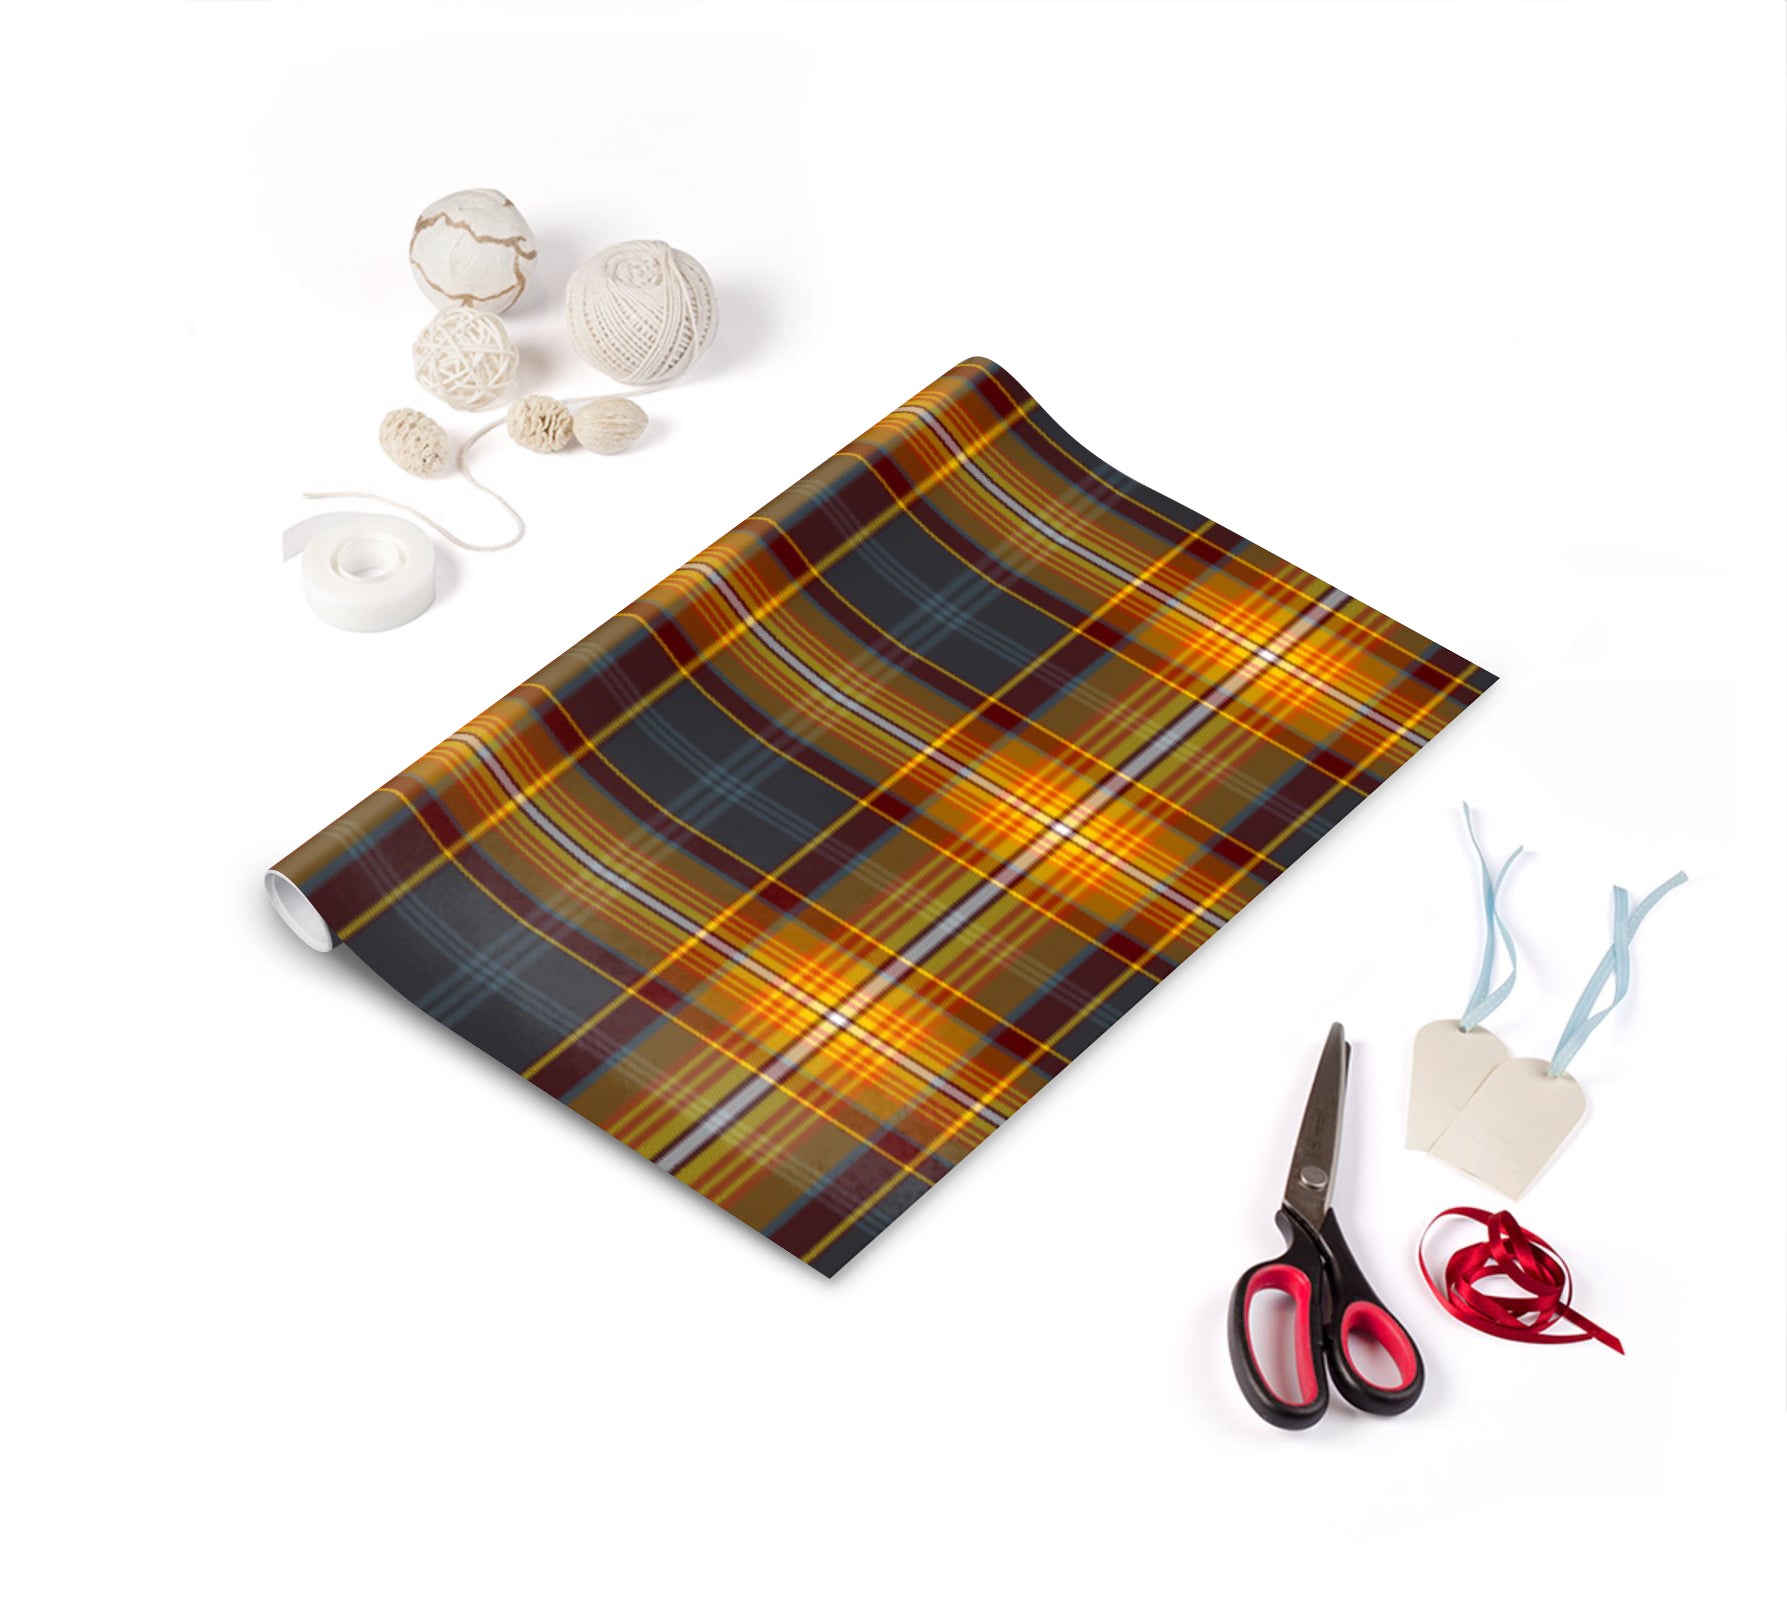 Designer wrapping paper exclusive to the Tartan Artisan ®. Featuring the Scotch Whisky Tartan ®, created in 2020 to celebrate the origin story of Scotch ...Scotland's world-famous national drink